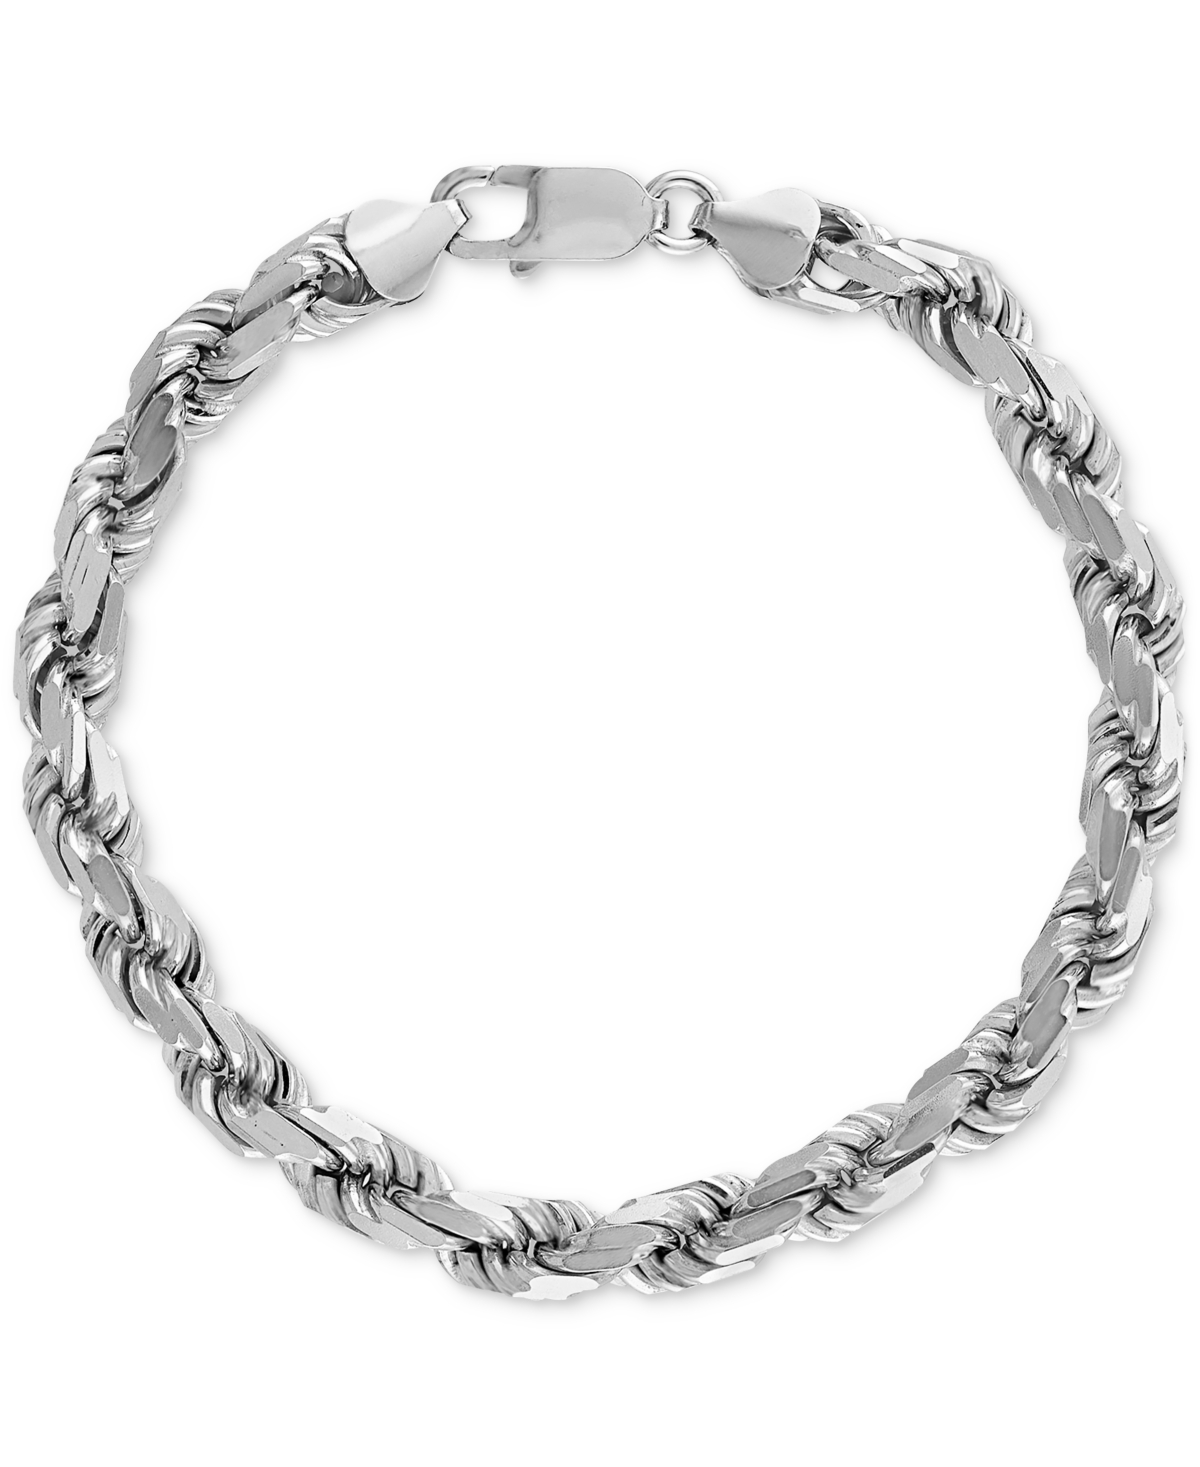 Esquire Men's Jewelry Rope Link Chain Bracelet (7.5mm), Created for Macy's